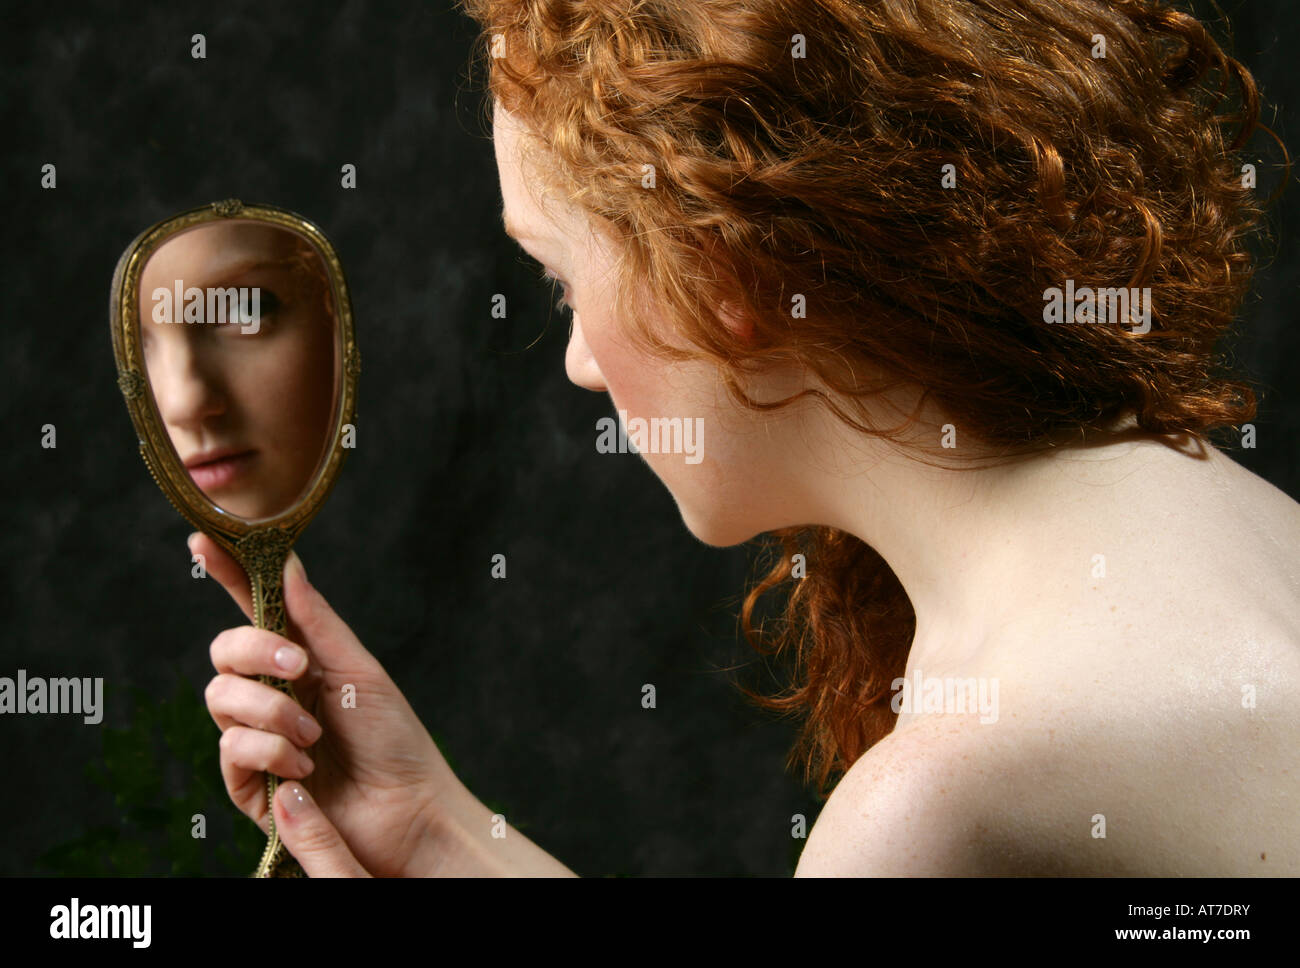 Portrait of a Young Red Haired Girl Looking in a Mirror Stock Photo